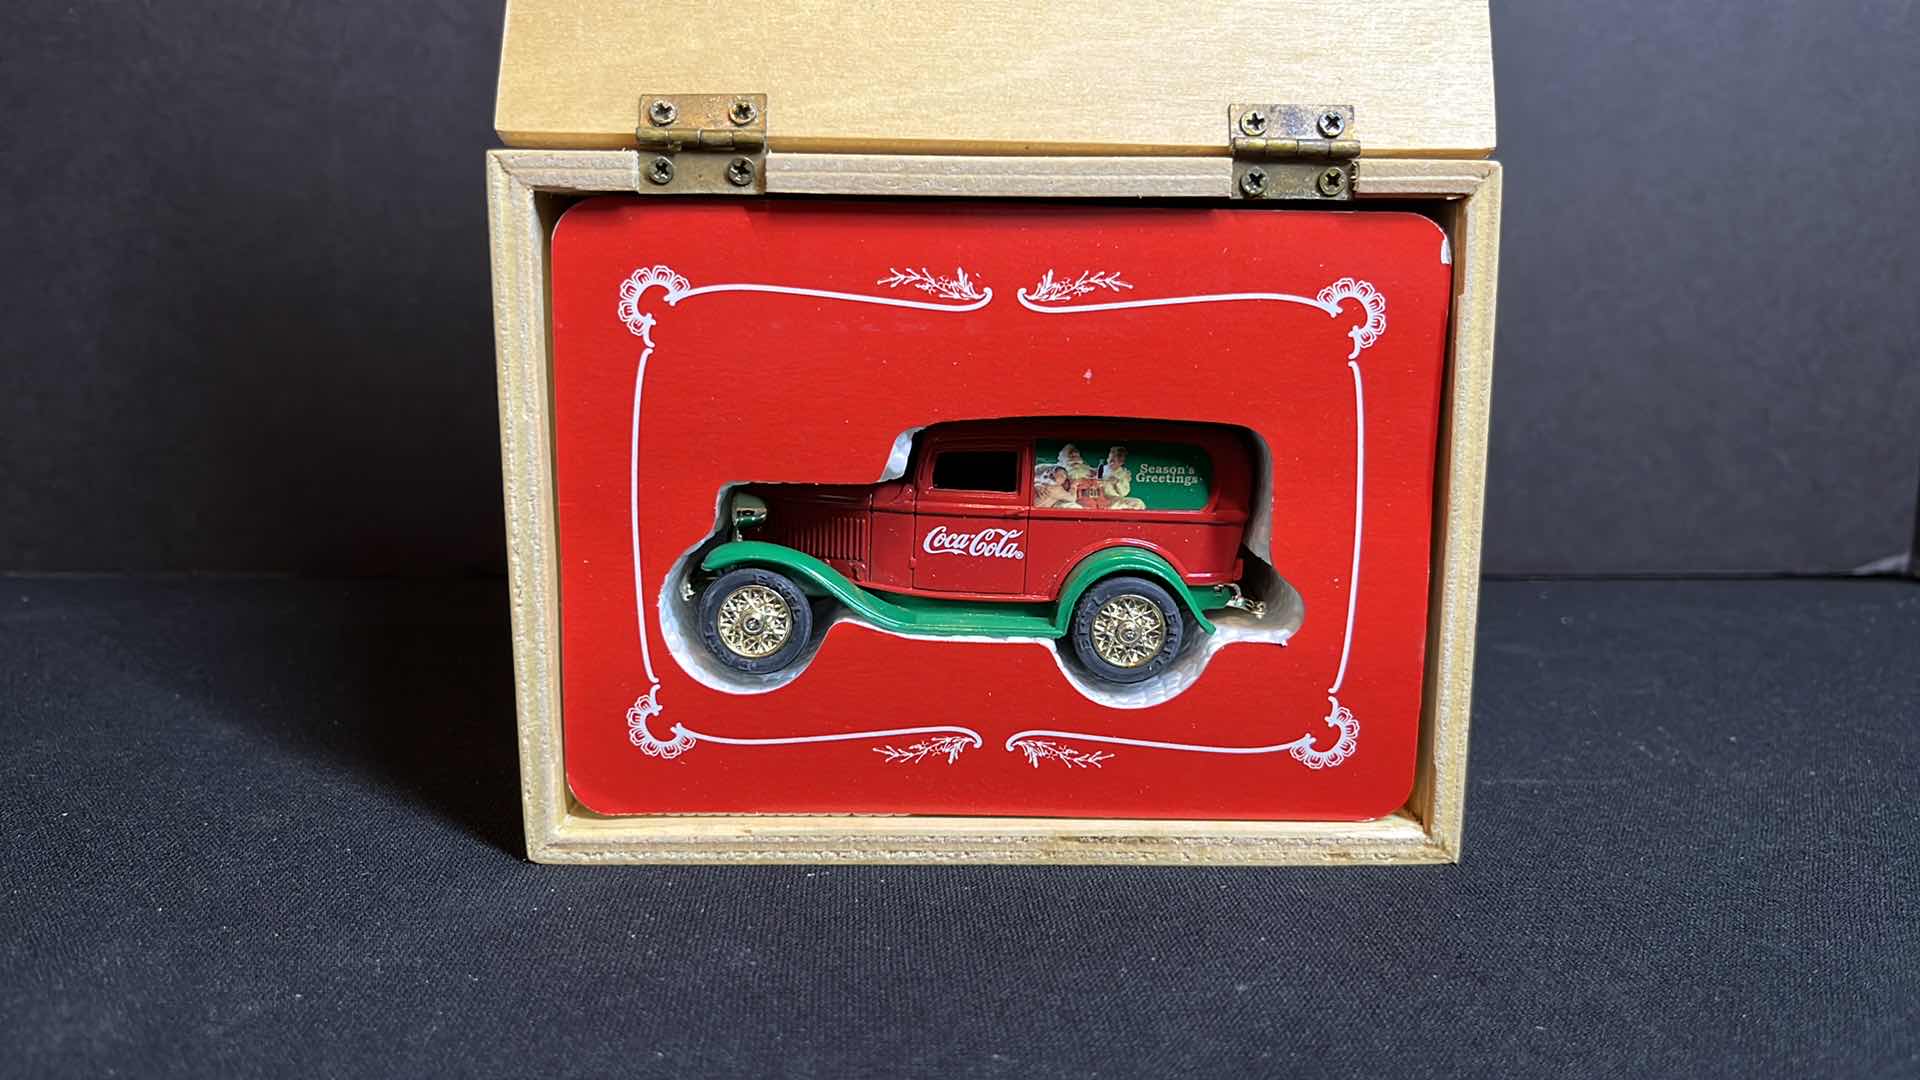 Photo 4 of NIB FORD MOTOR COMPANY COCA-COLA WOODEN BOX W 1932 FORD PANEL DELIVERY TRUCK, 1996 (STOCK # F294)